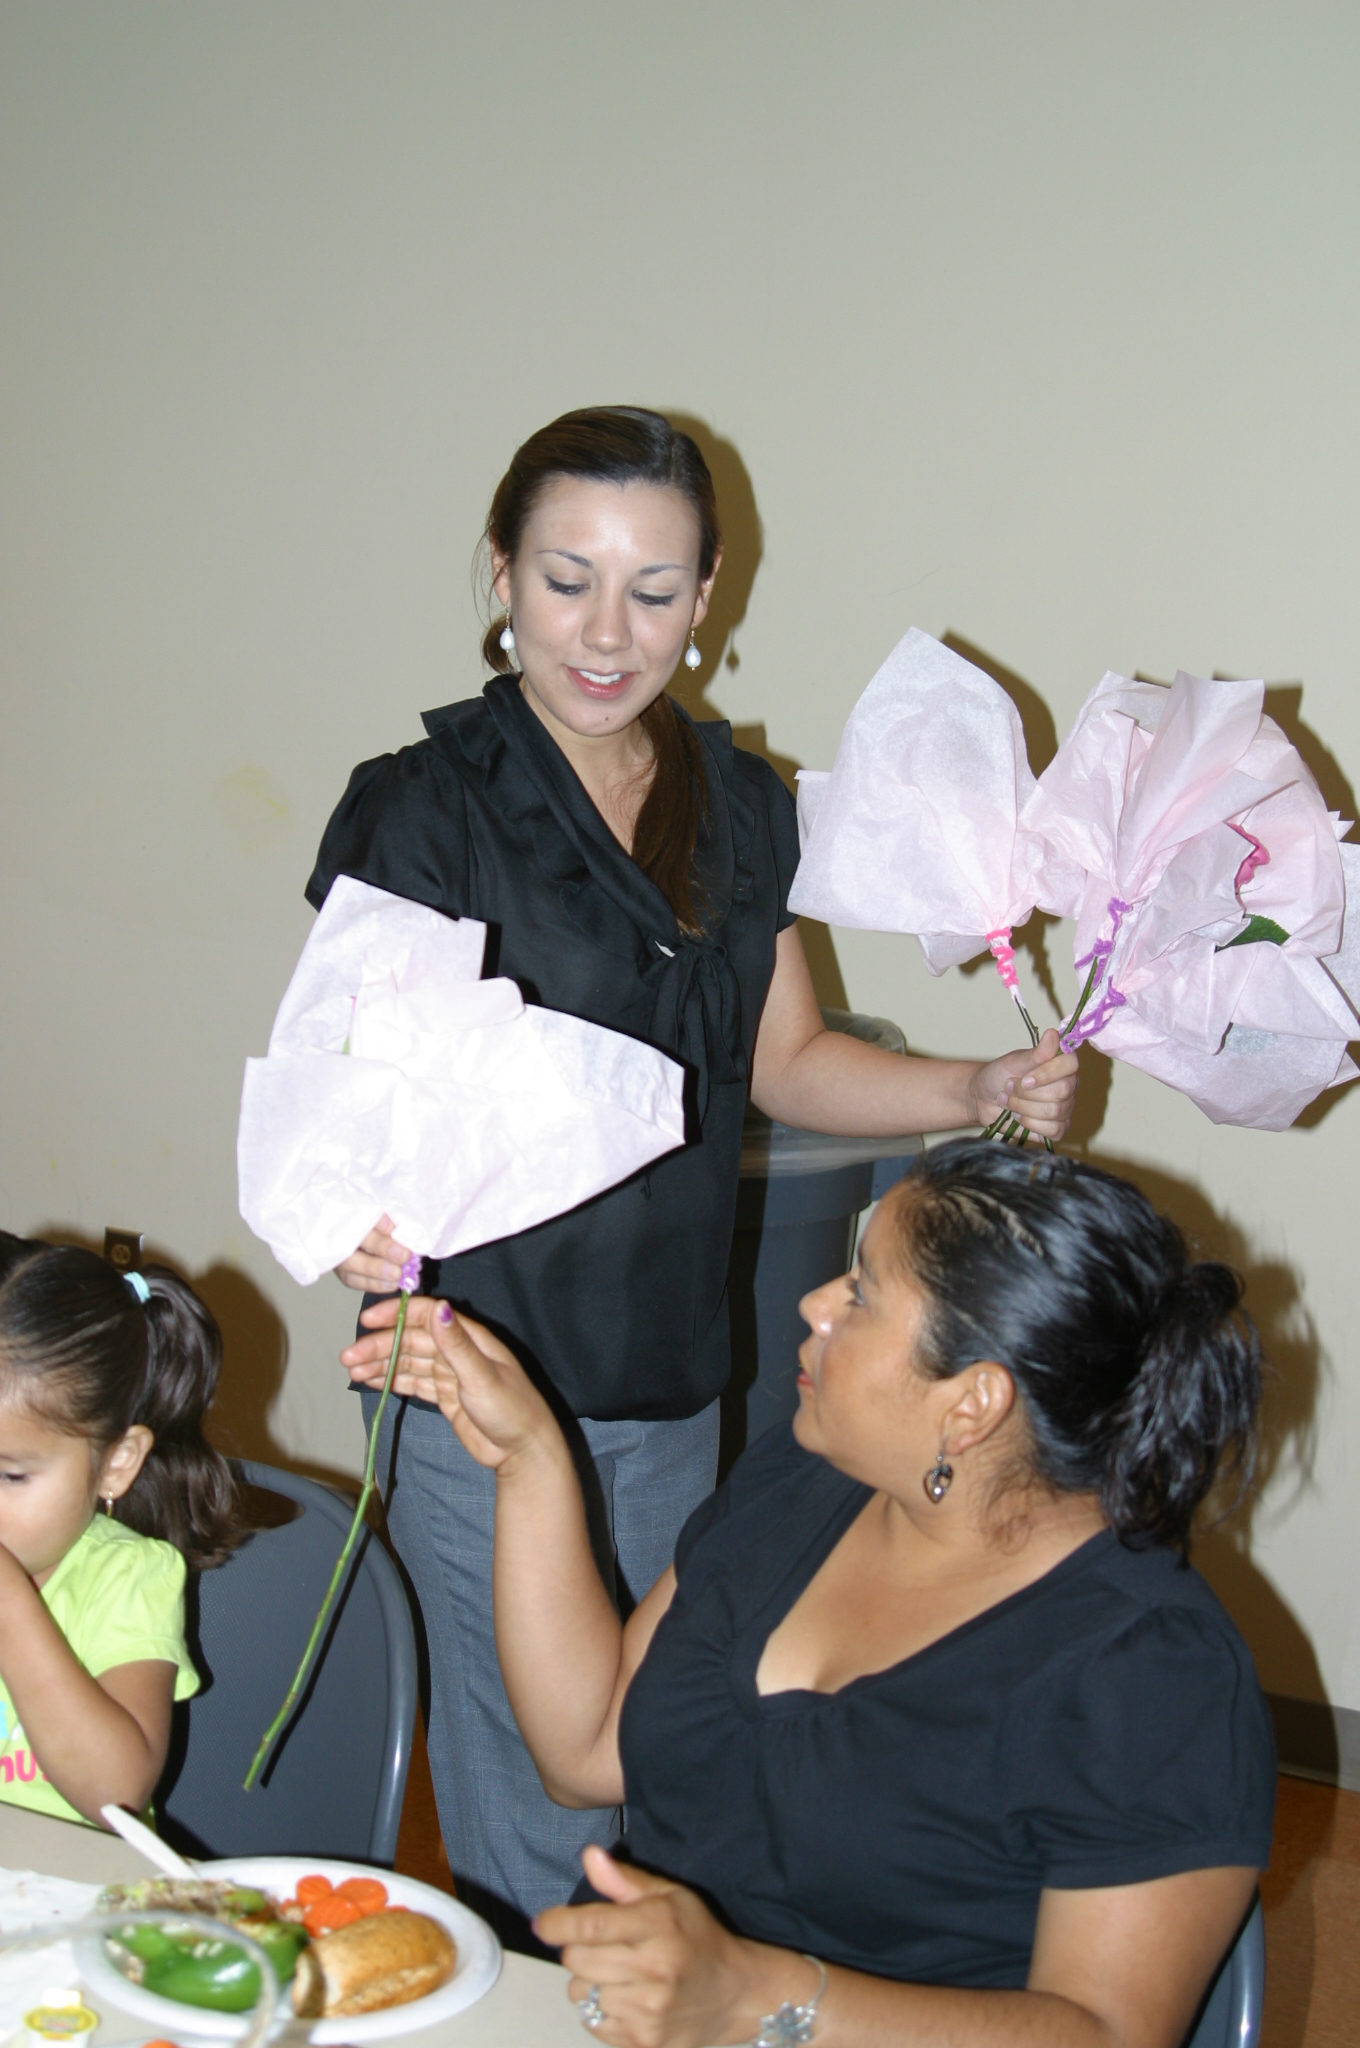 Meld Growing Families Celebrates Mother's Day